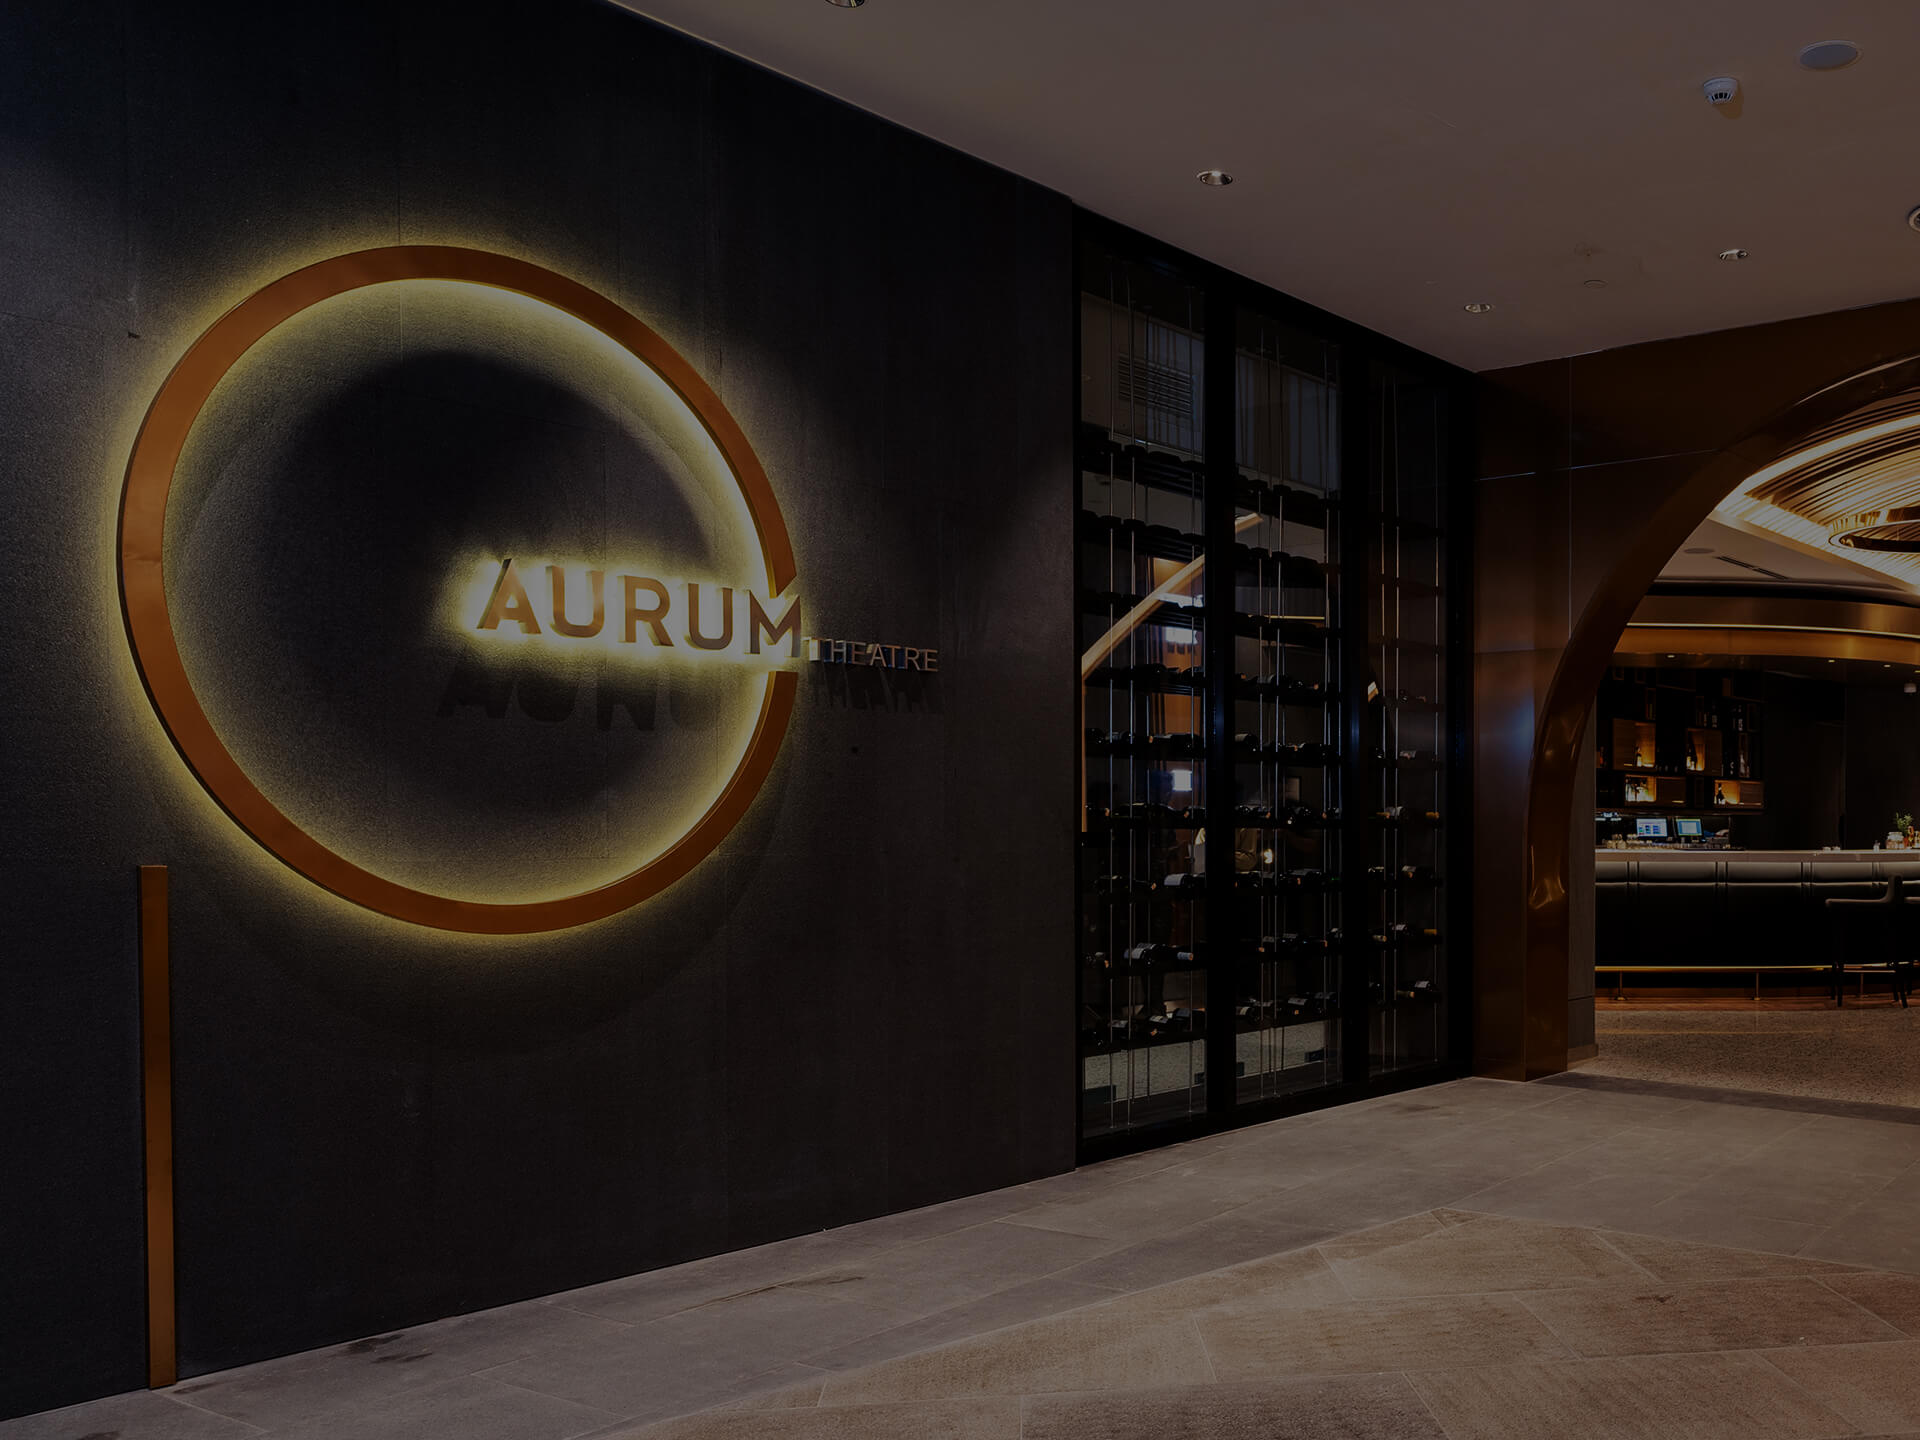 INTRODUCING OUR ULTRA LUXURIOUS ULTRA LUXURIOUS BOUTIQUE CINEMA BOUTIQUE CINEMA